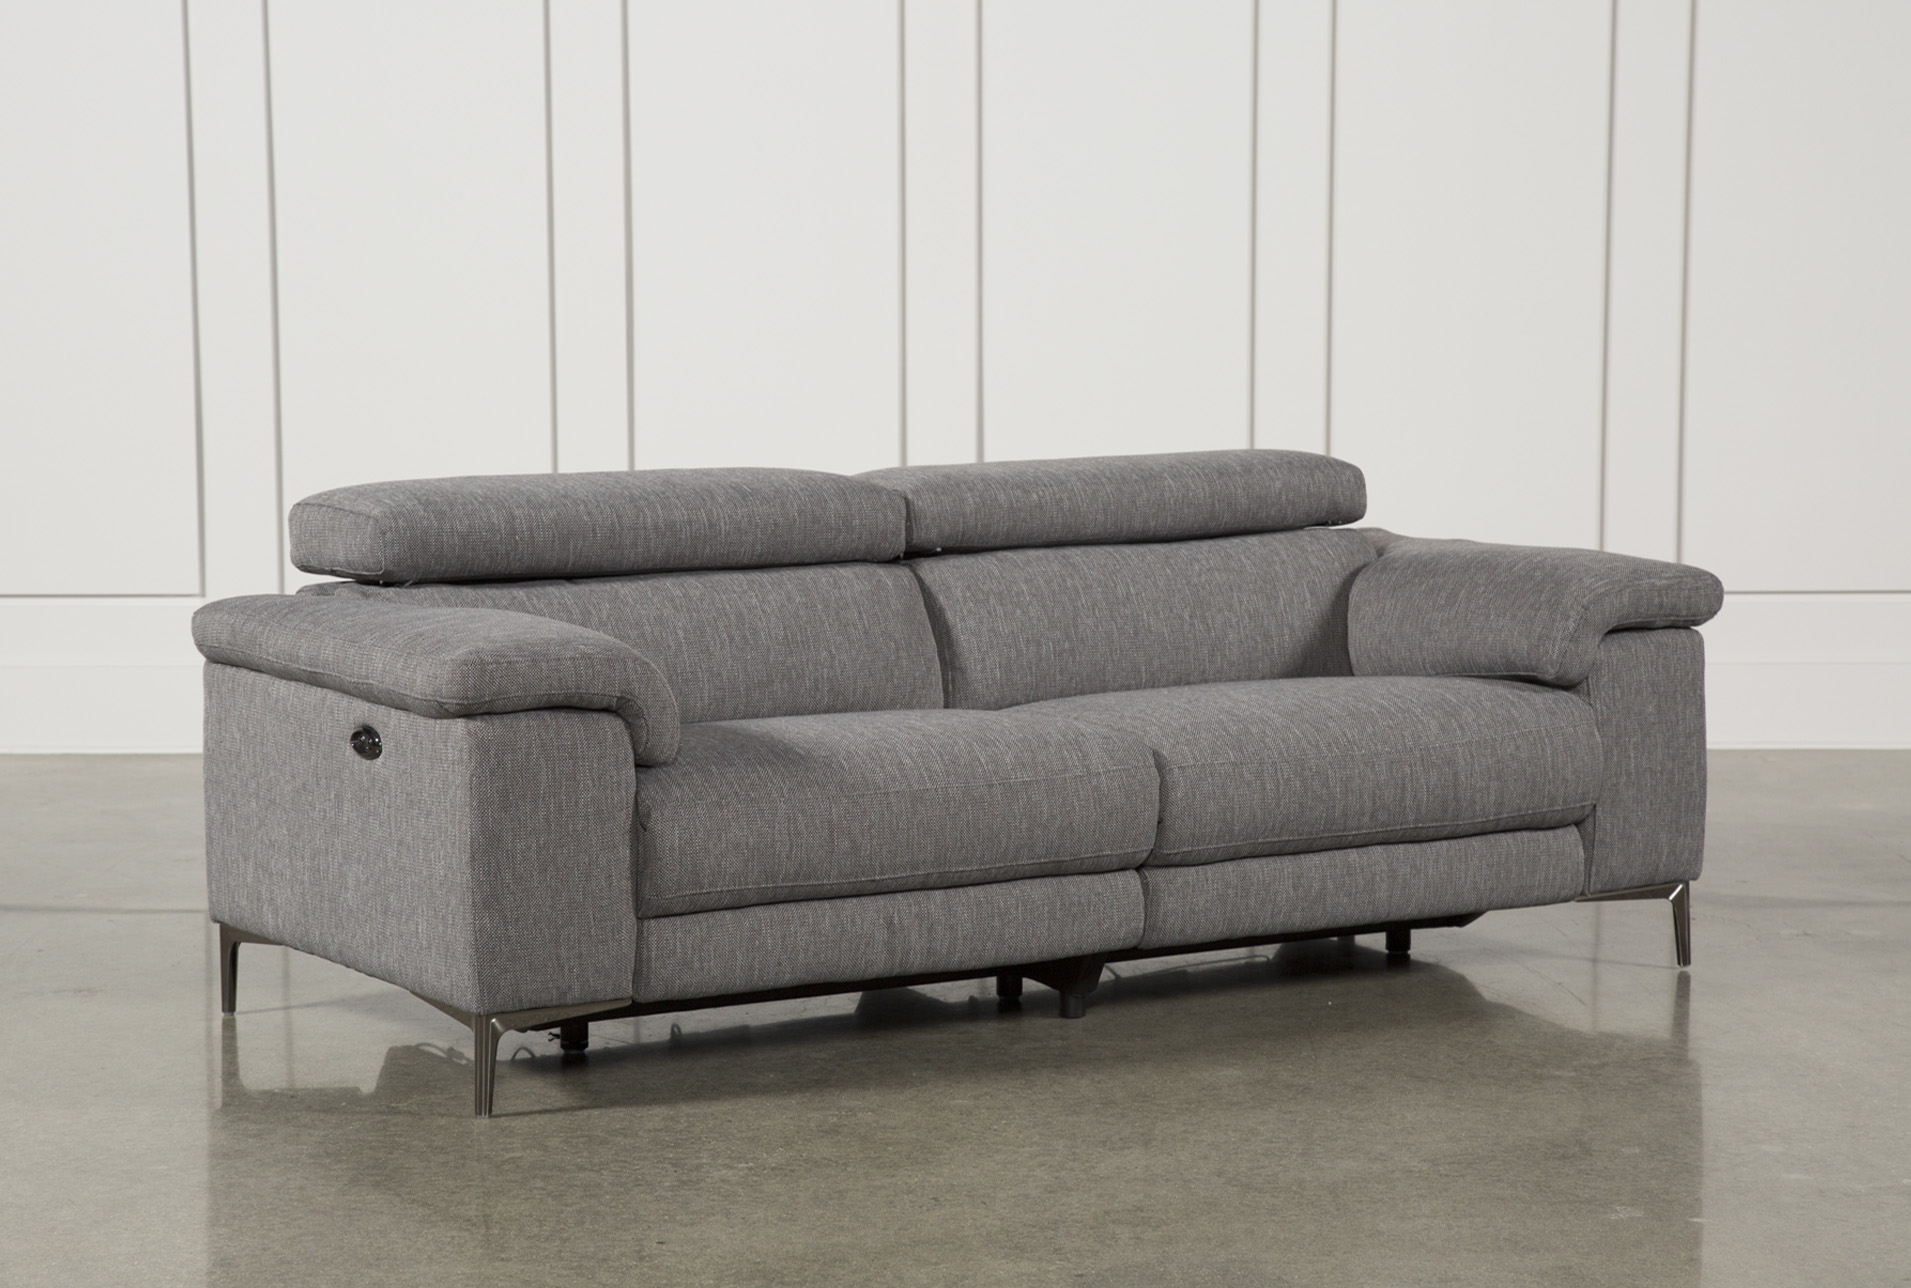 Talin Grey Power Reclining Sofa W/Usb (Qty: 1) has been successfully added  to your Cart.